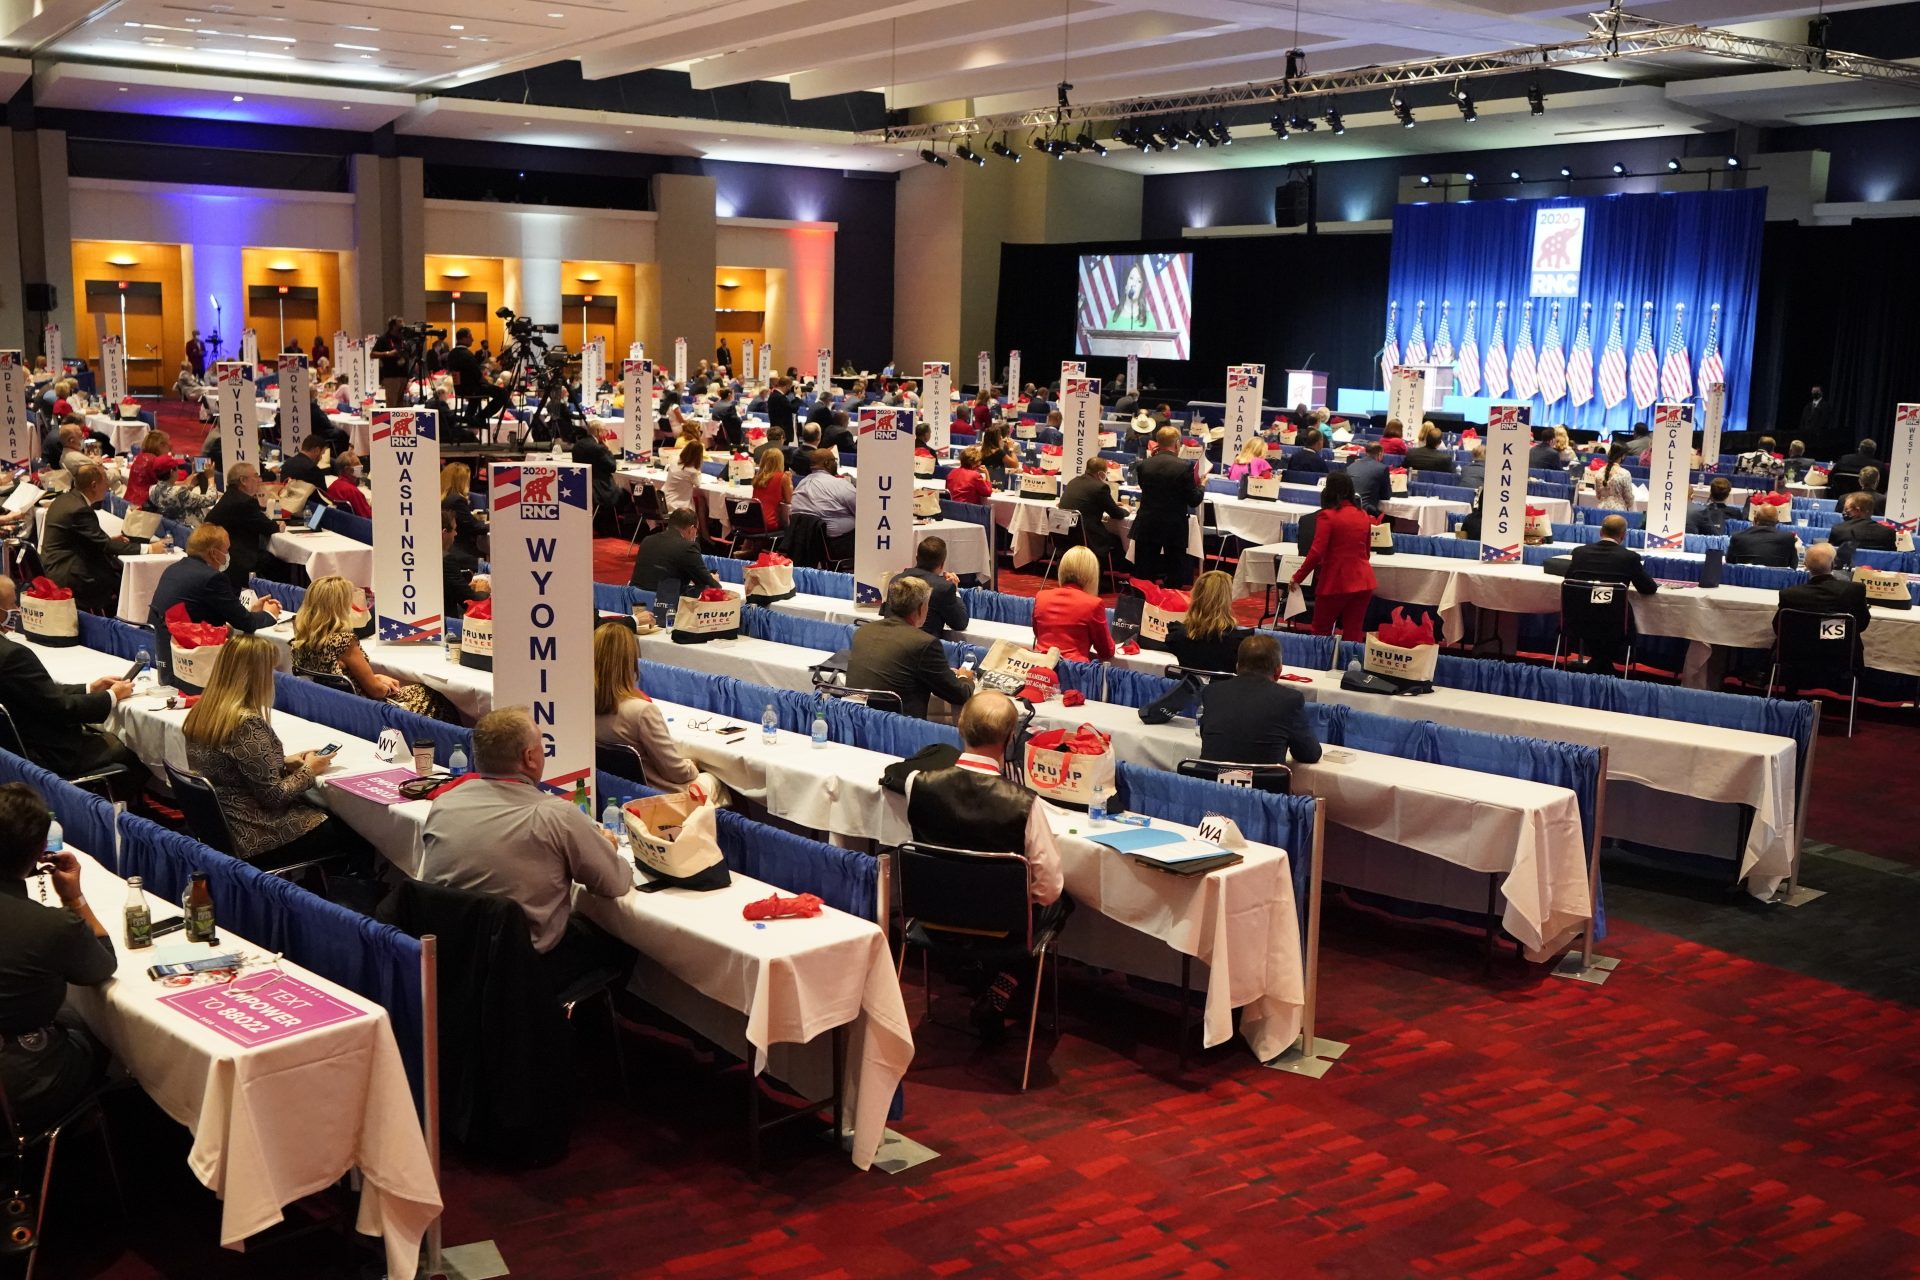 Delegates are seated for the first day of the Republican National Convention, Monday, Aug. 24, 2020, in Charlotte, N.C.